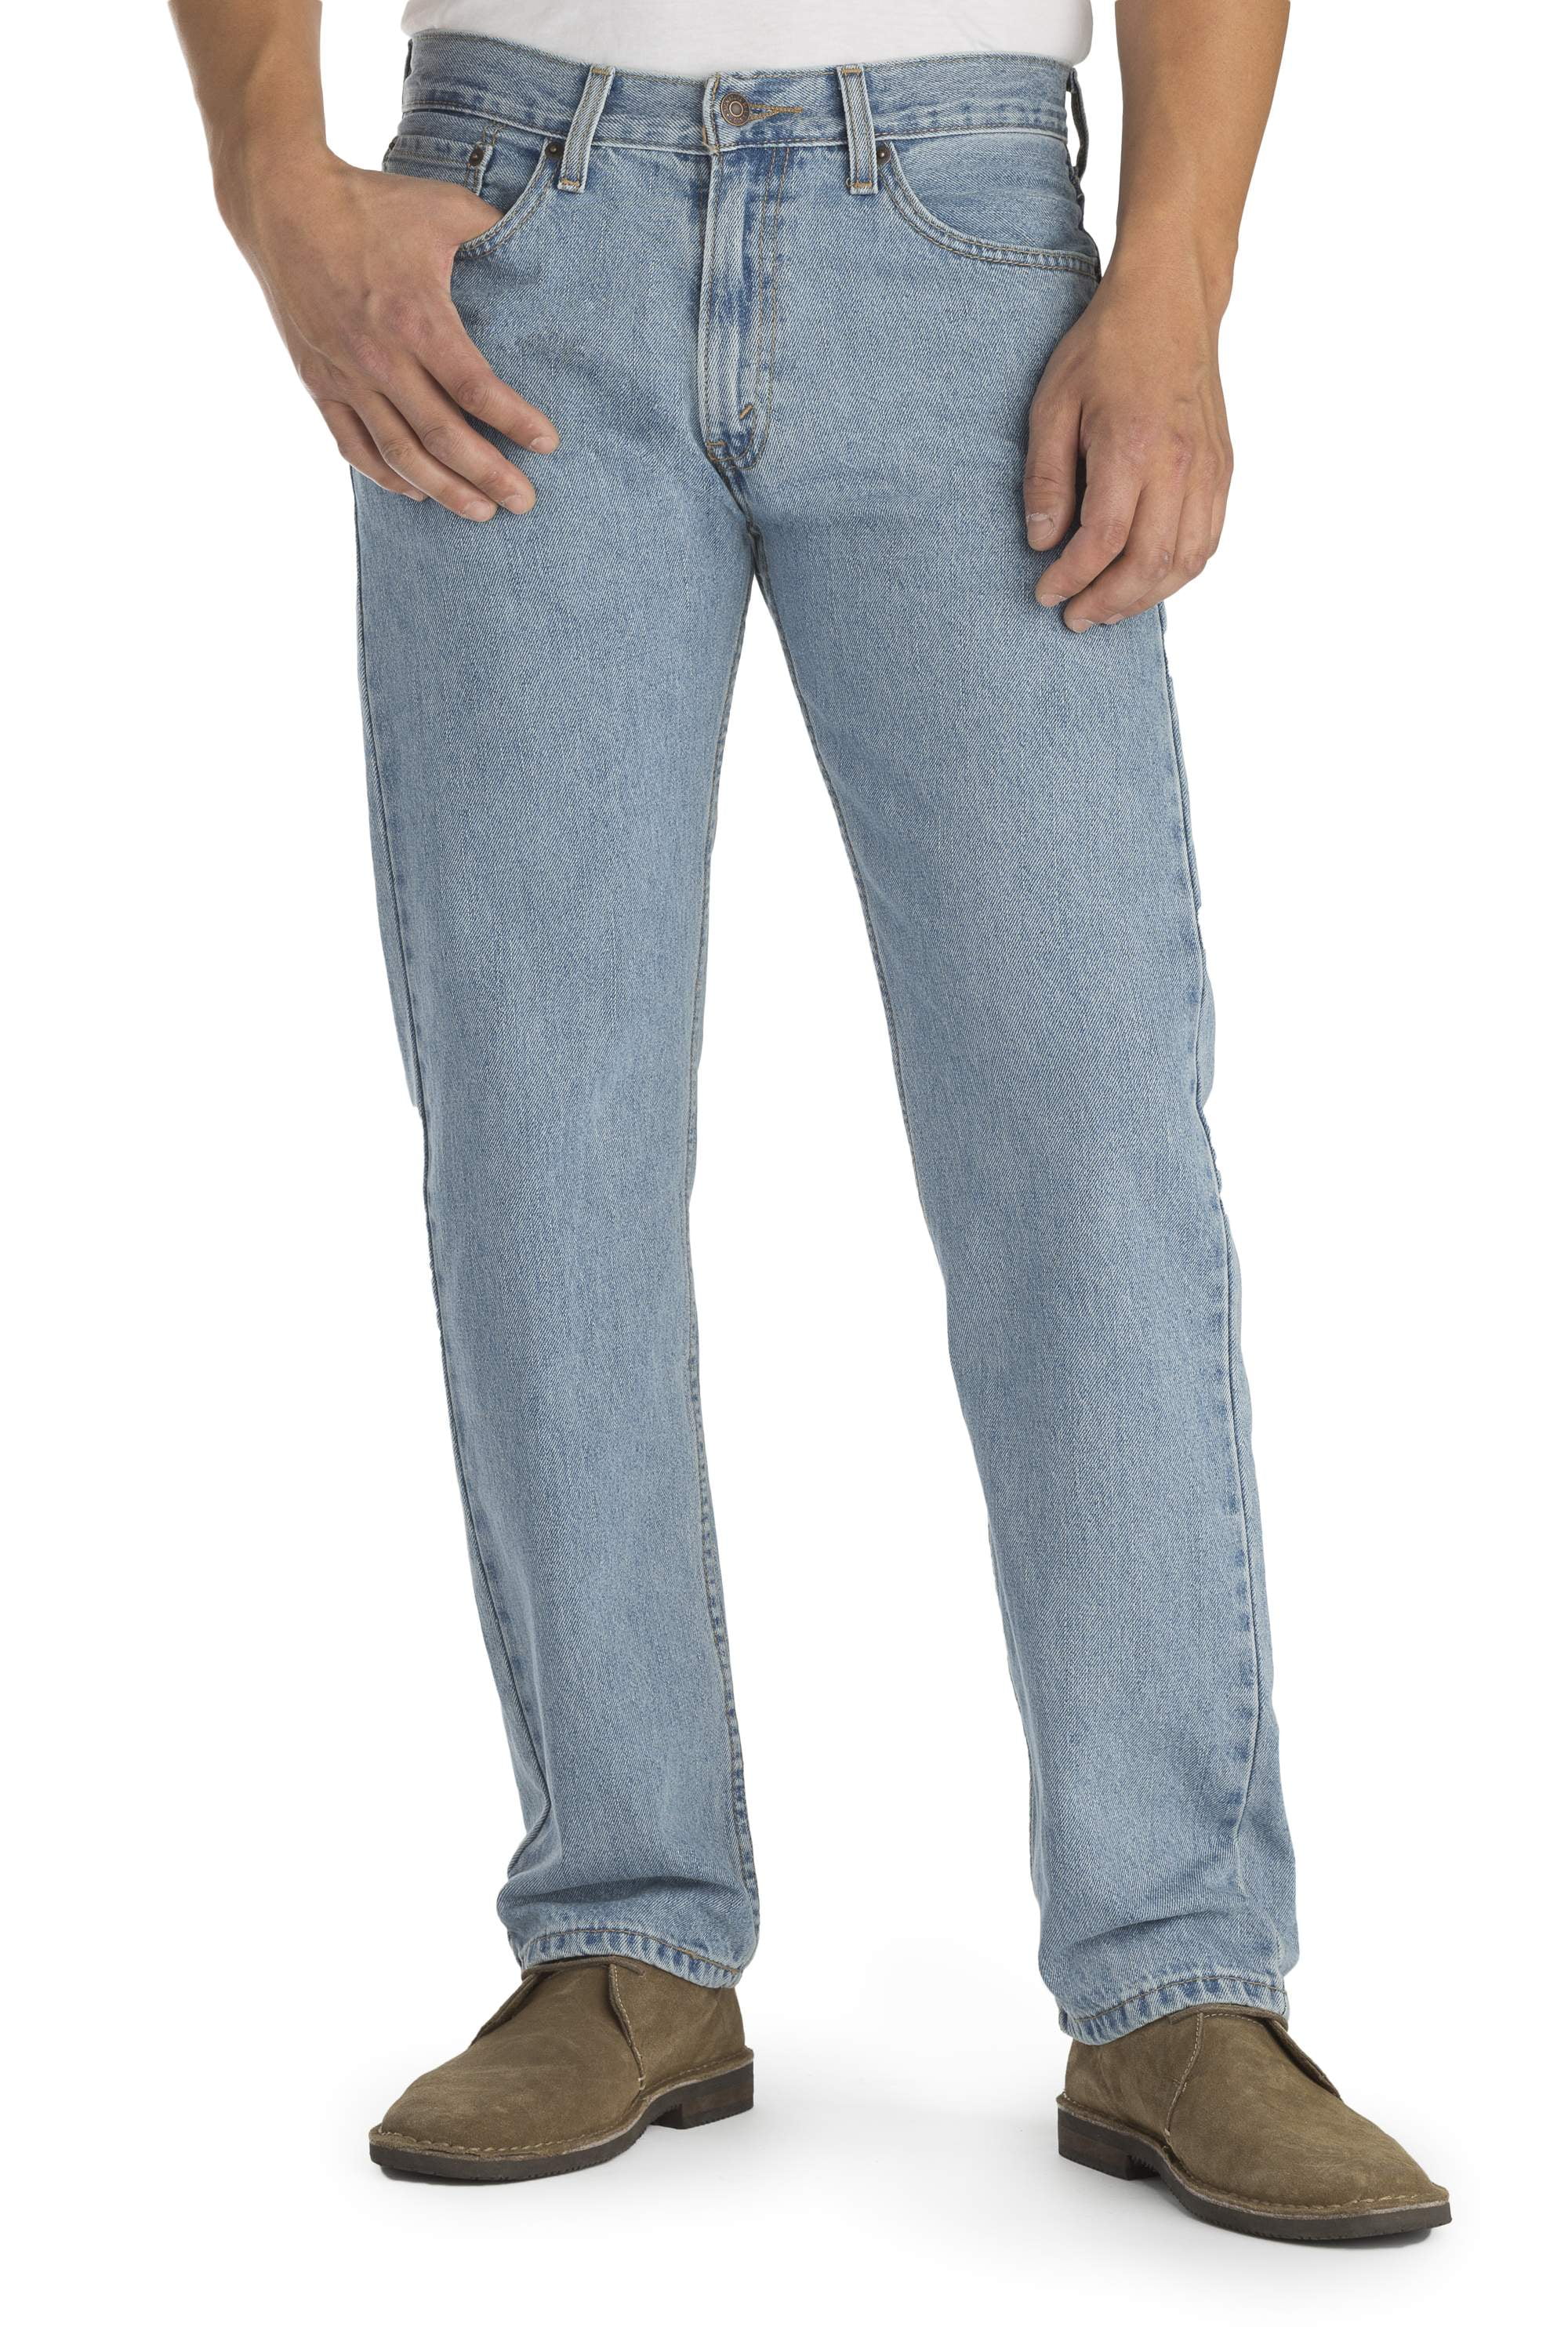 Signature by Levi Strauss & Co. - Signature by Levi Strauss ...